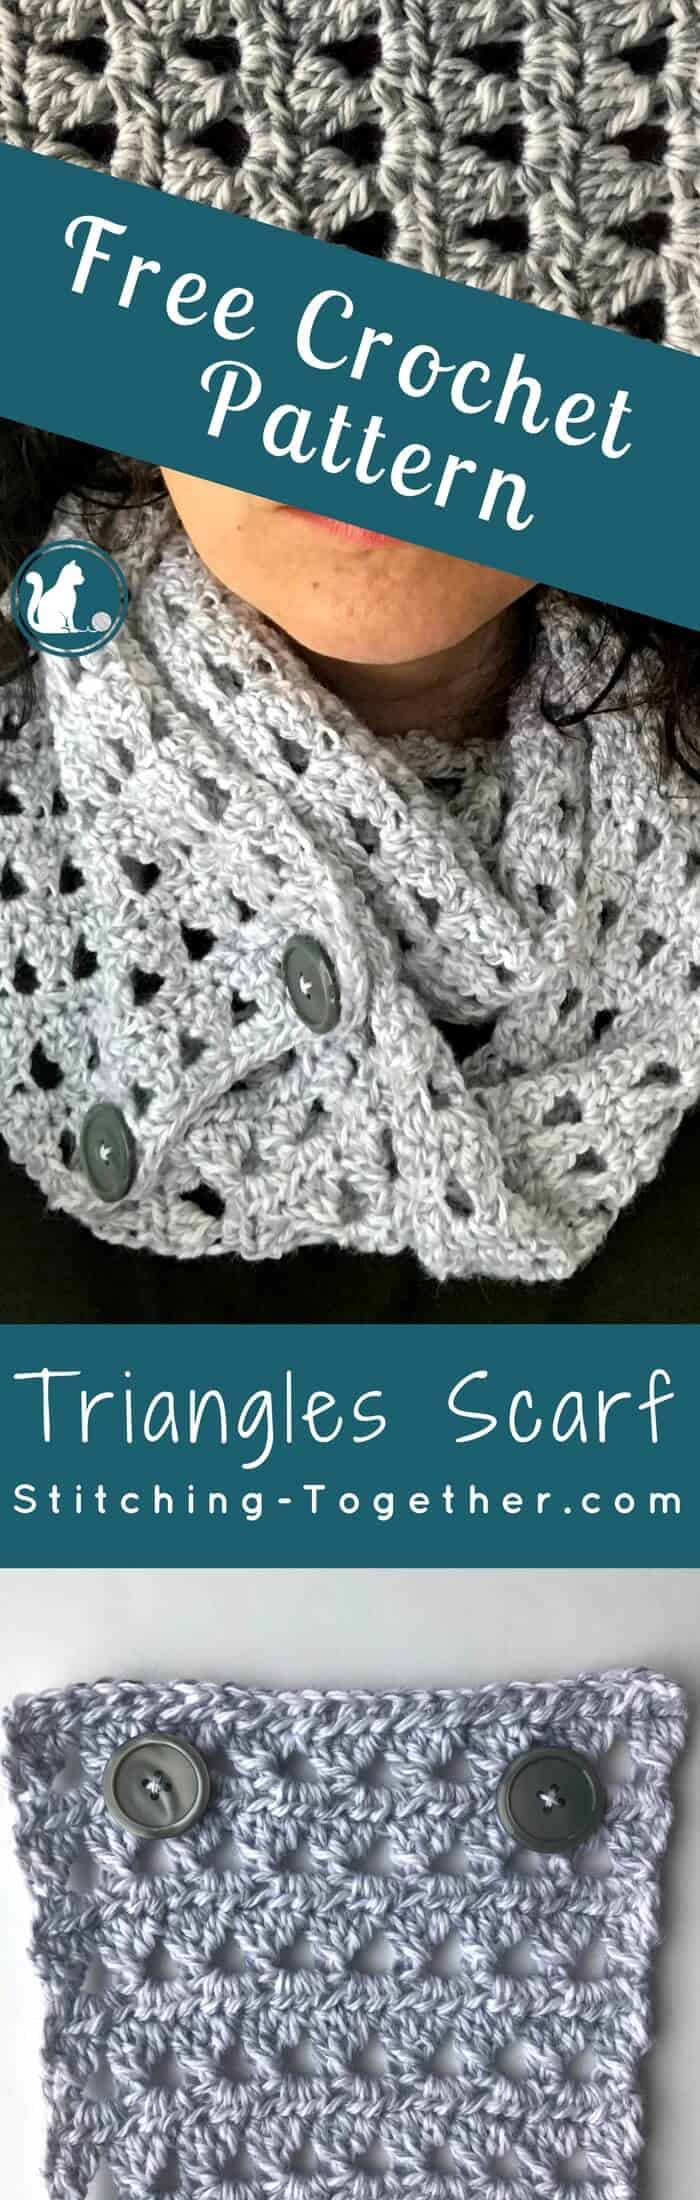 A regular scarf or an infinity scarf? YES! I love this convertible crochet scarf with buttons! You must check out this free pattern and make your own triangles crochet scarf.